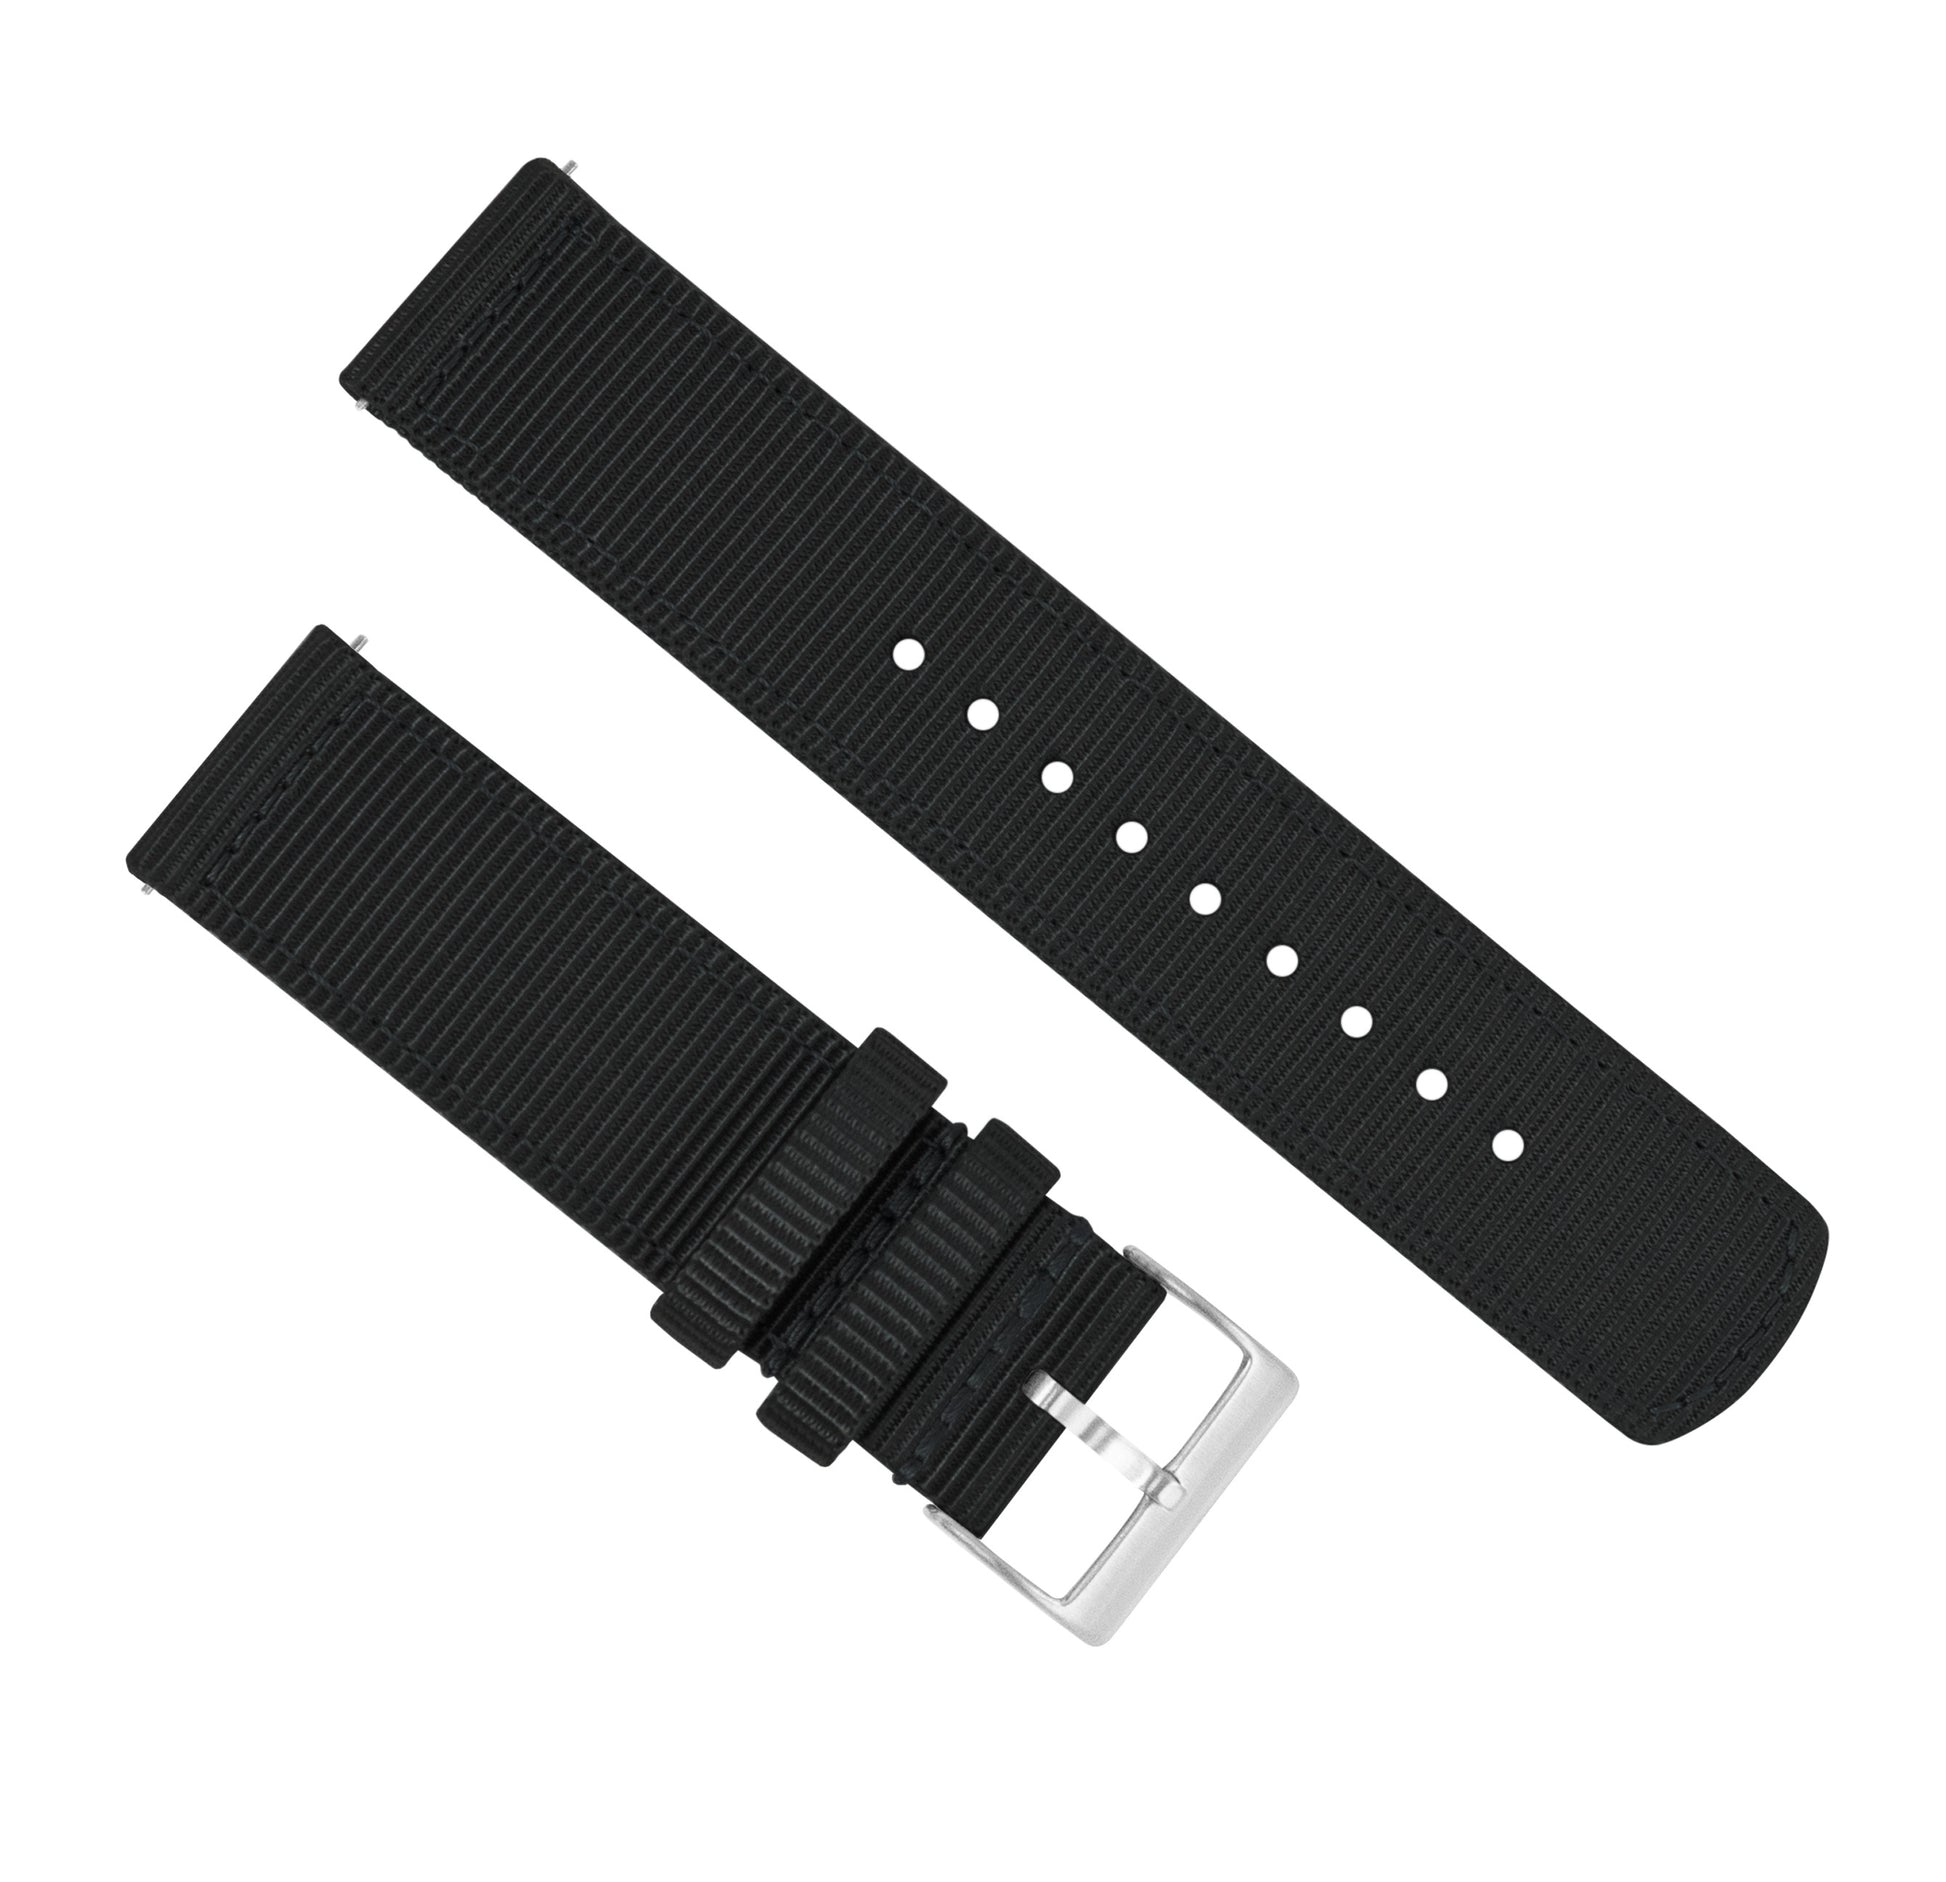 Fossil Gen 5 | Two-Piece NATO Style | Black - Barton Watch Bands